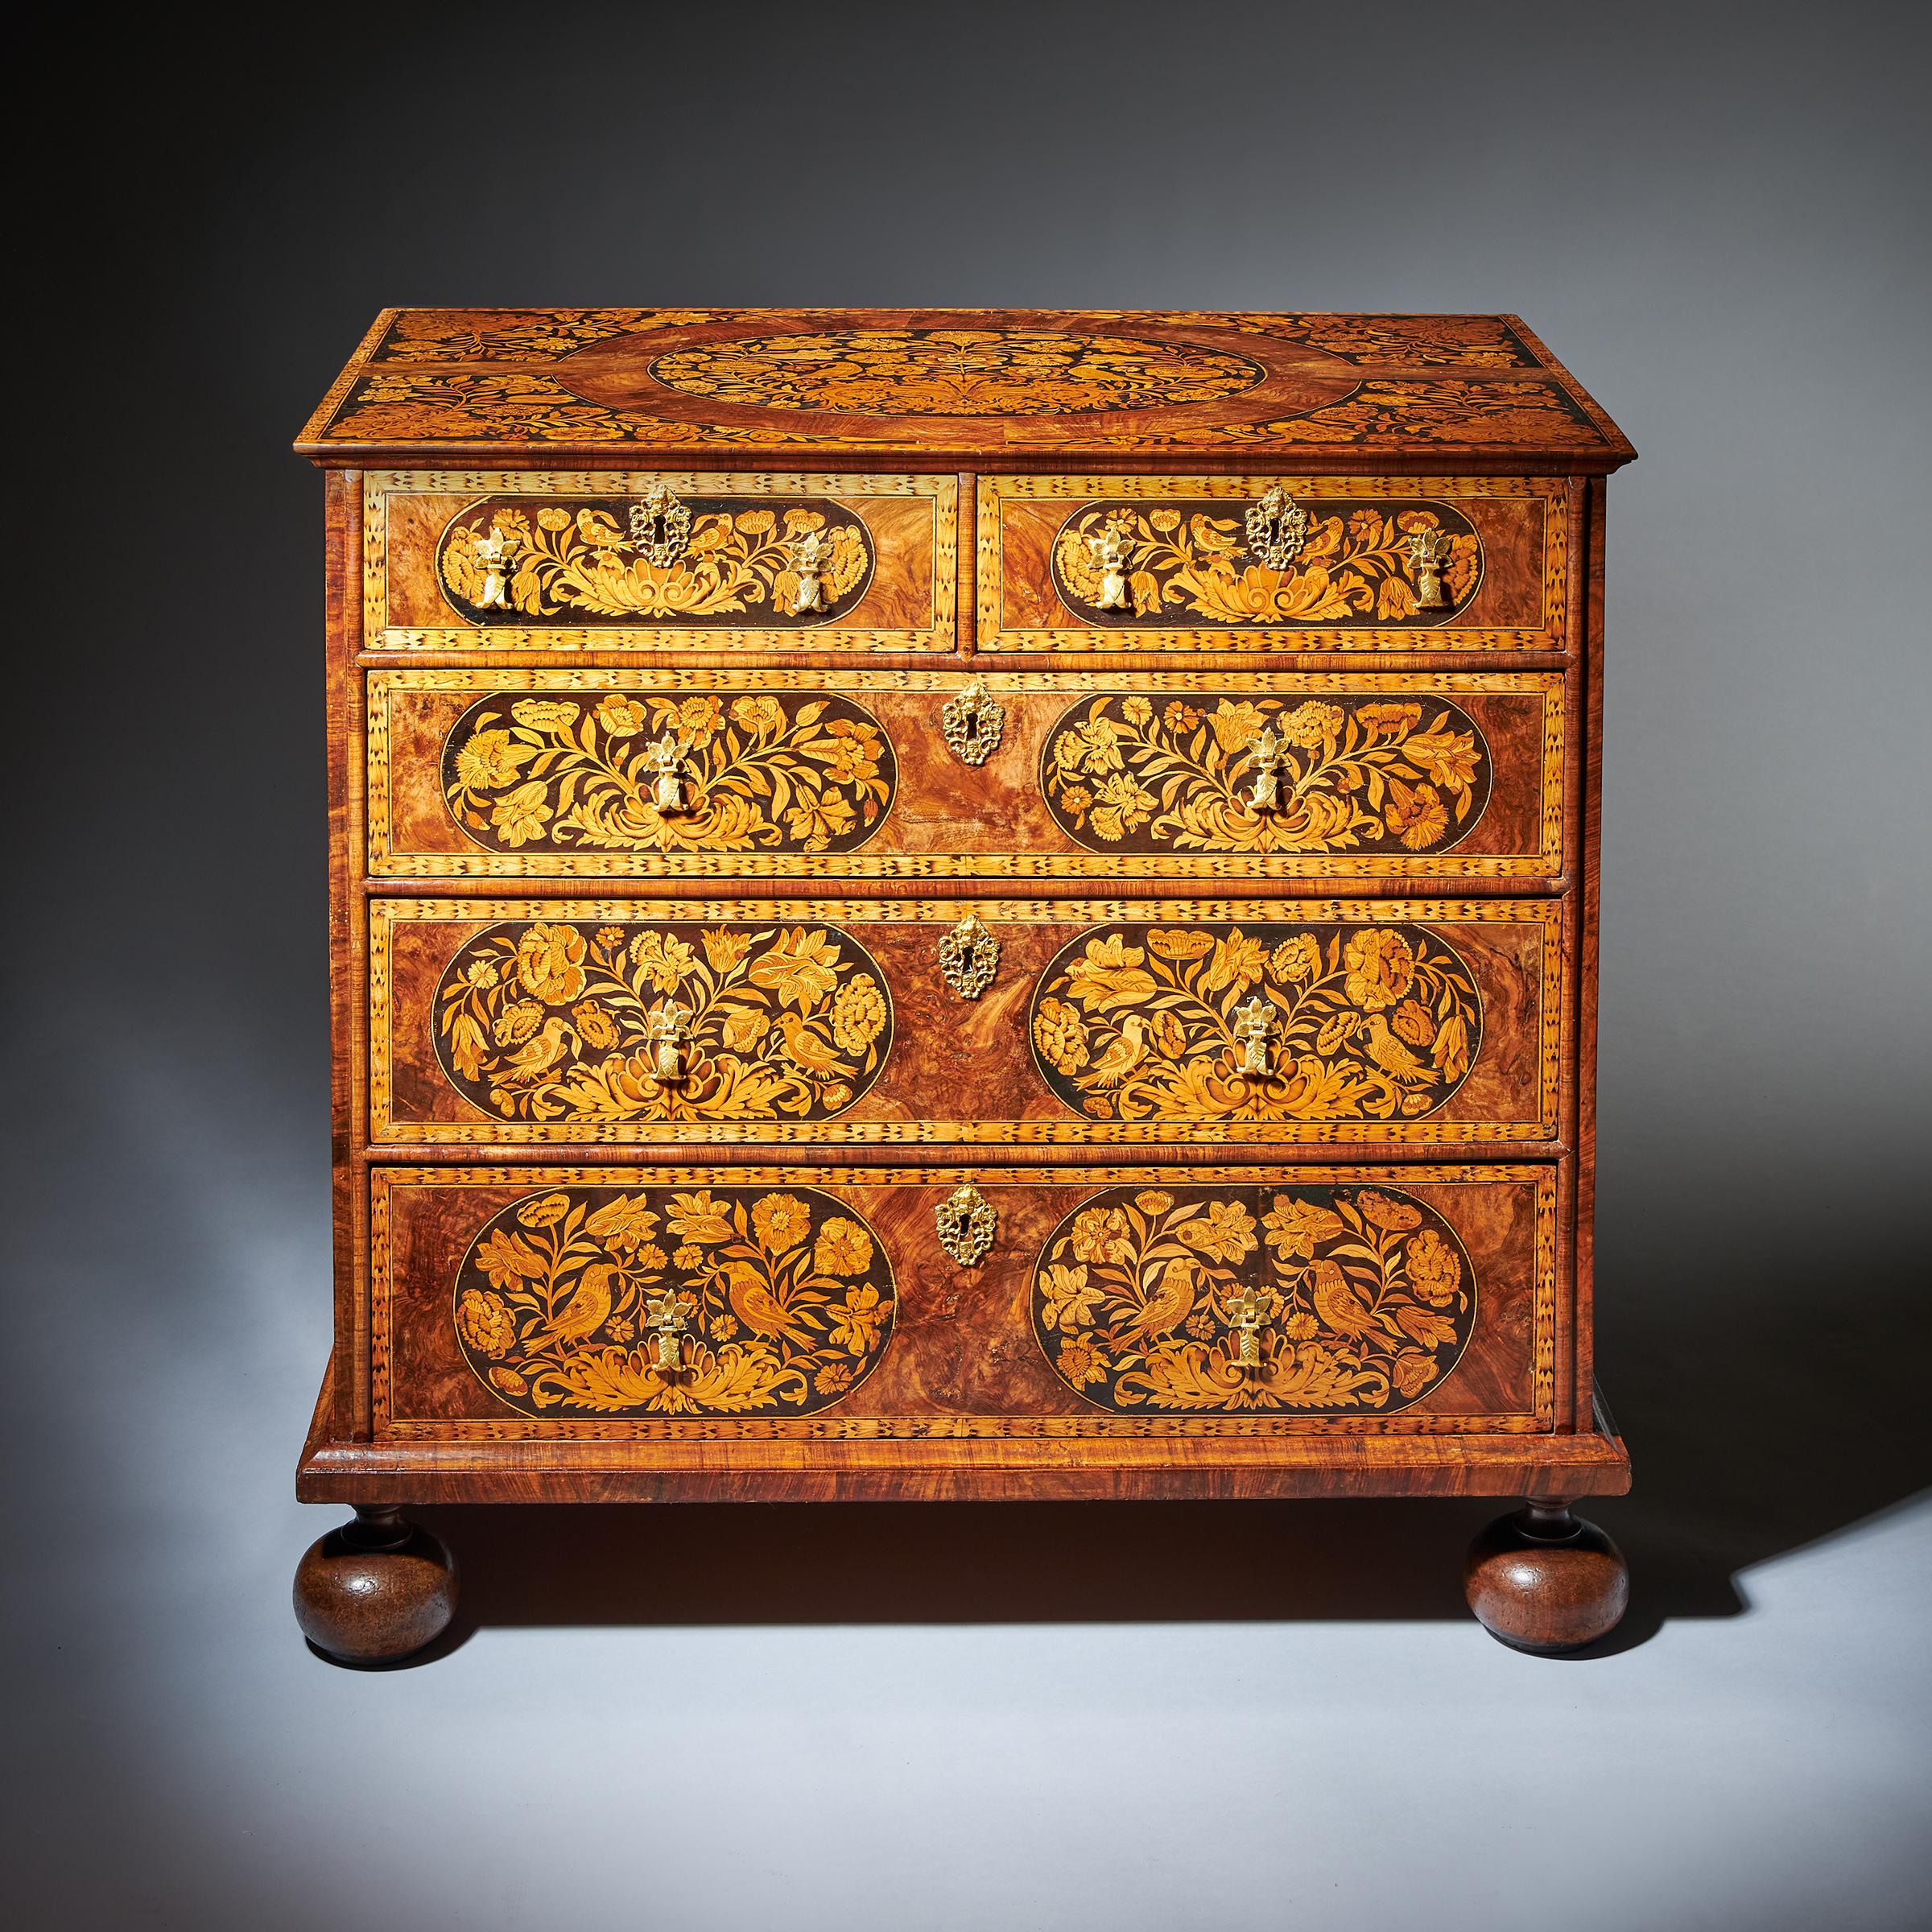 A William and Mary walnut floral marquetry chest, circa 1690.

The rectangular ogee moulded top with a central banded oval inlaid with spring flowers, birds and scrolls of acanthus, on an ebony ground. 

The two short over three long oak-lined